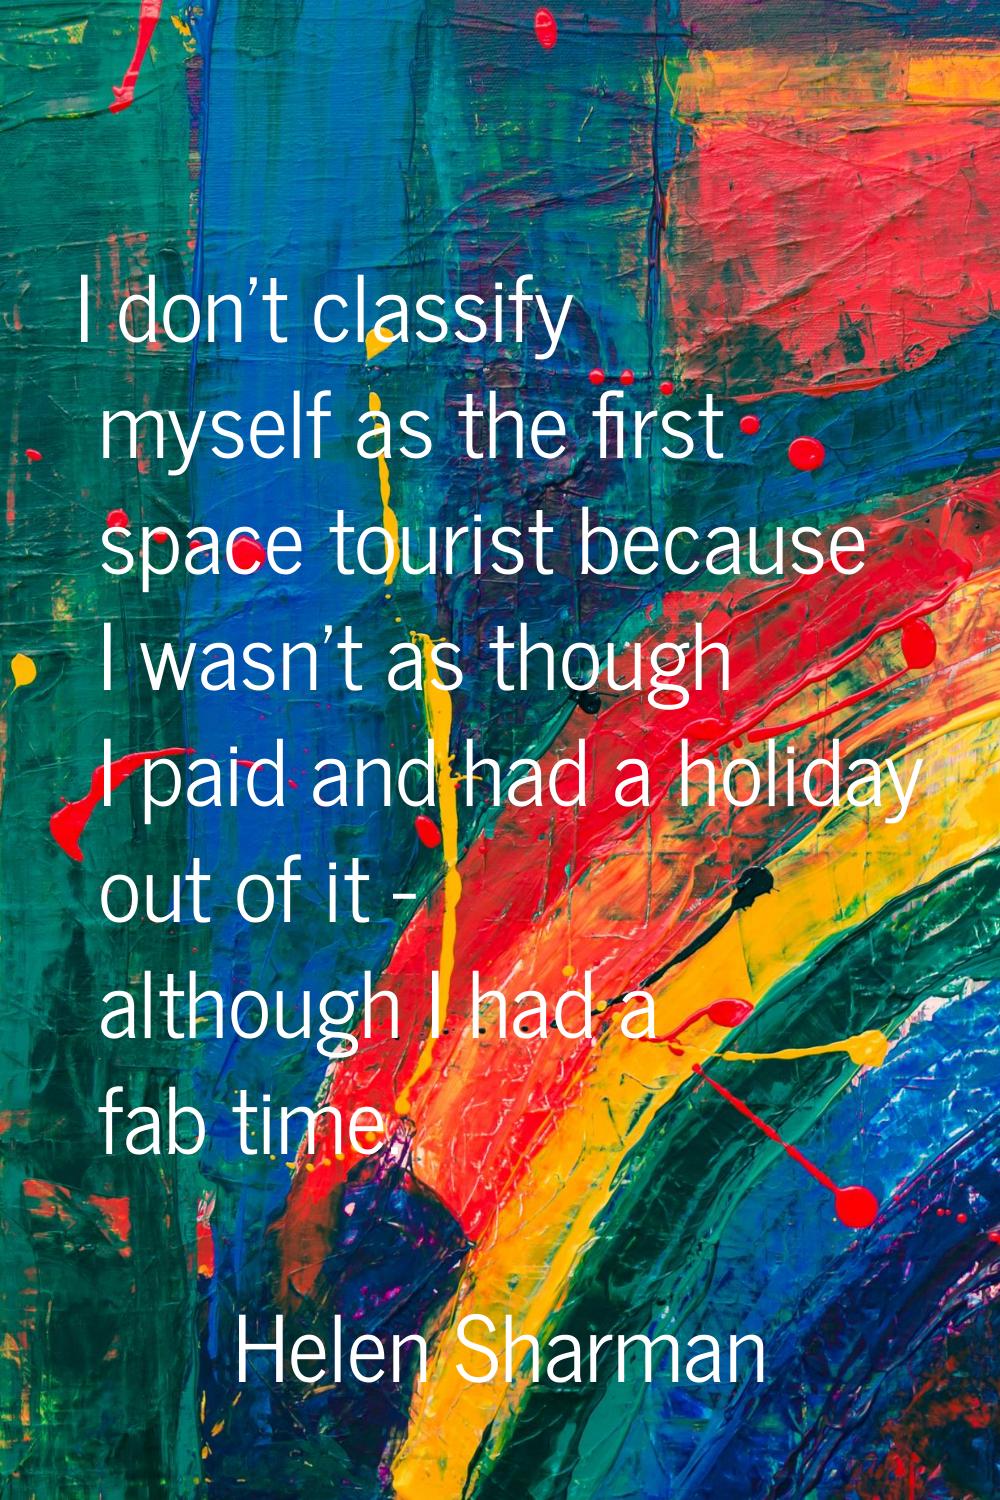 I don't classify myself as the first space tourist because I wasn't as though I paid and had a holi